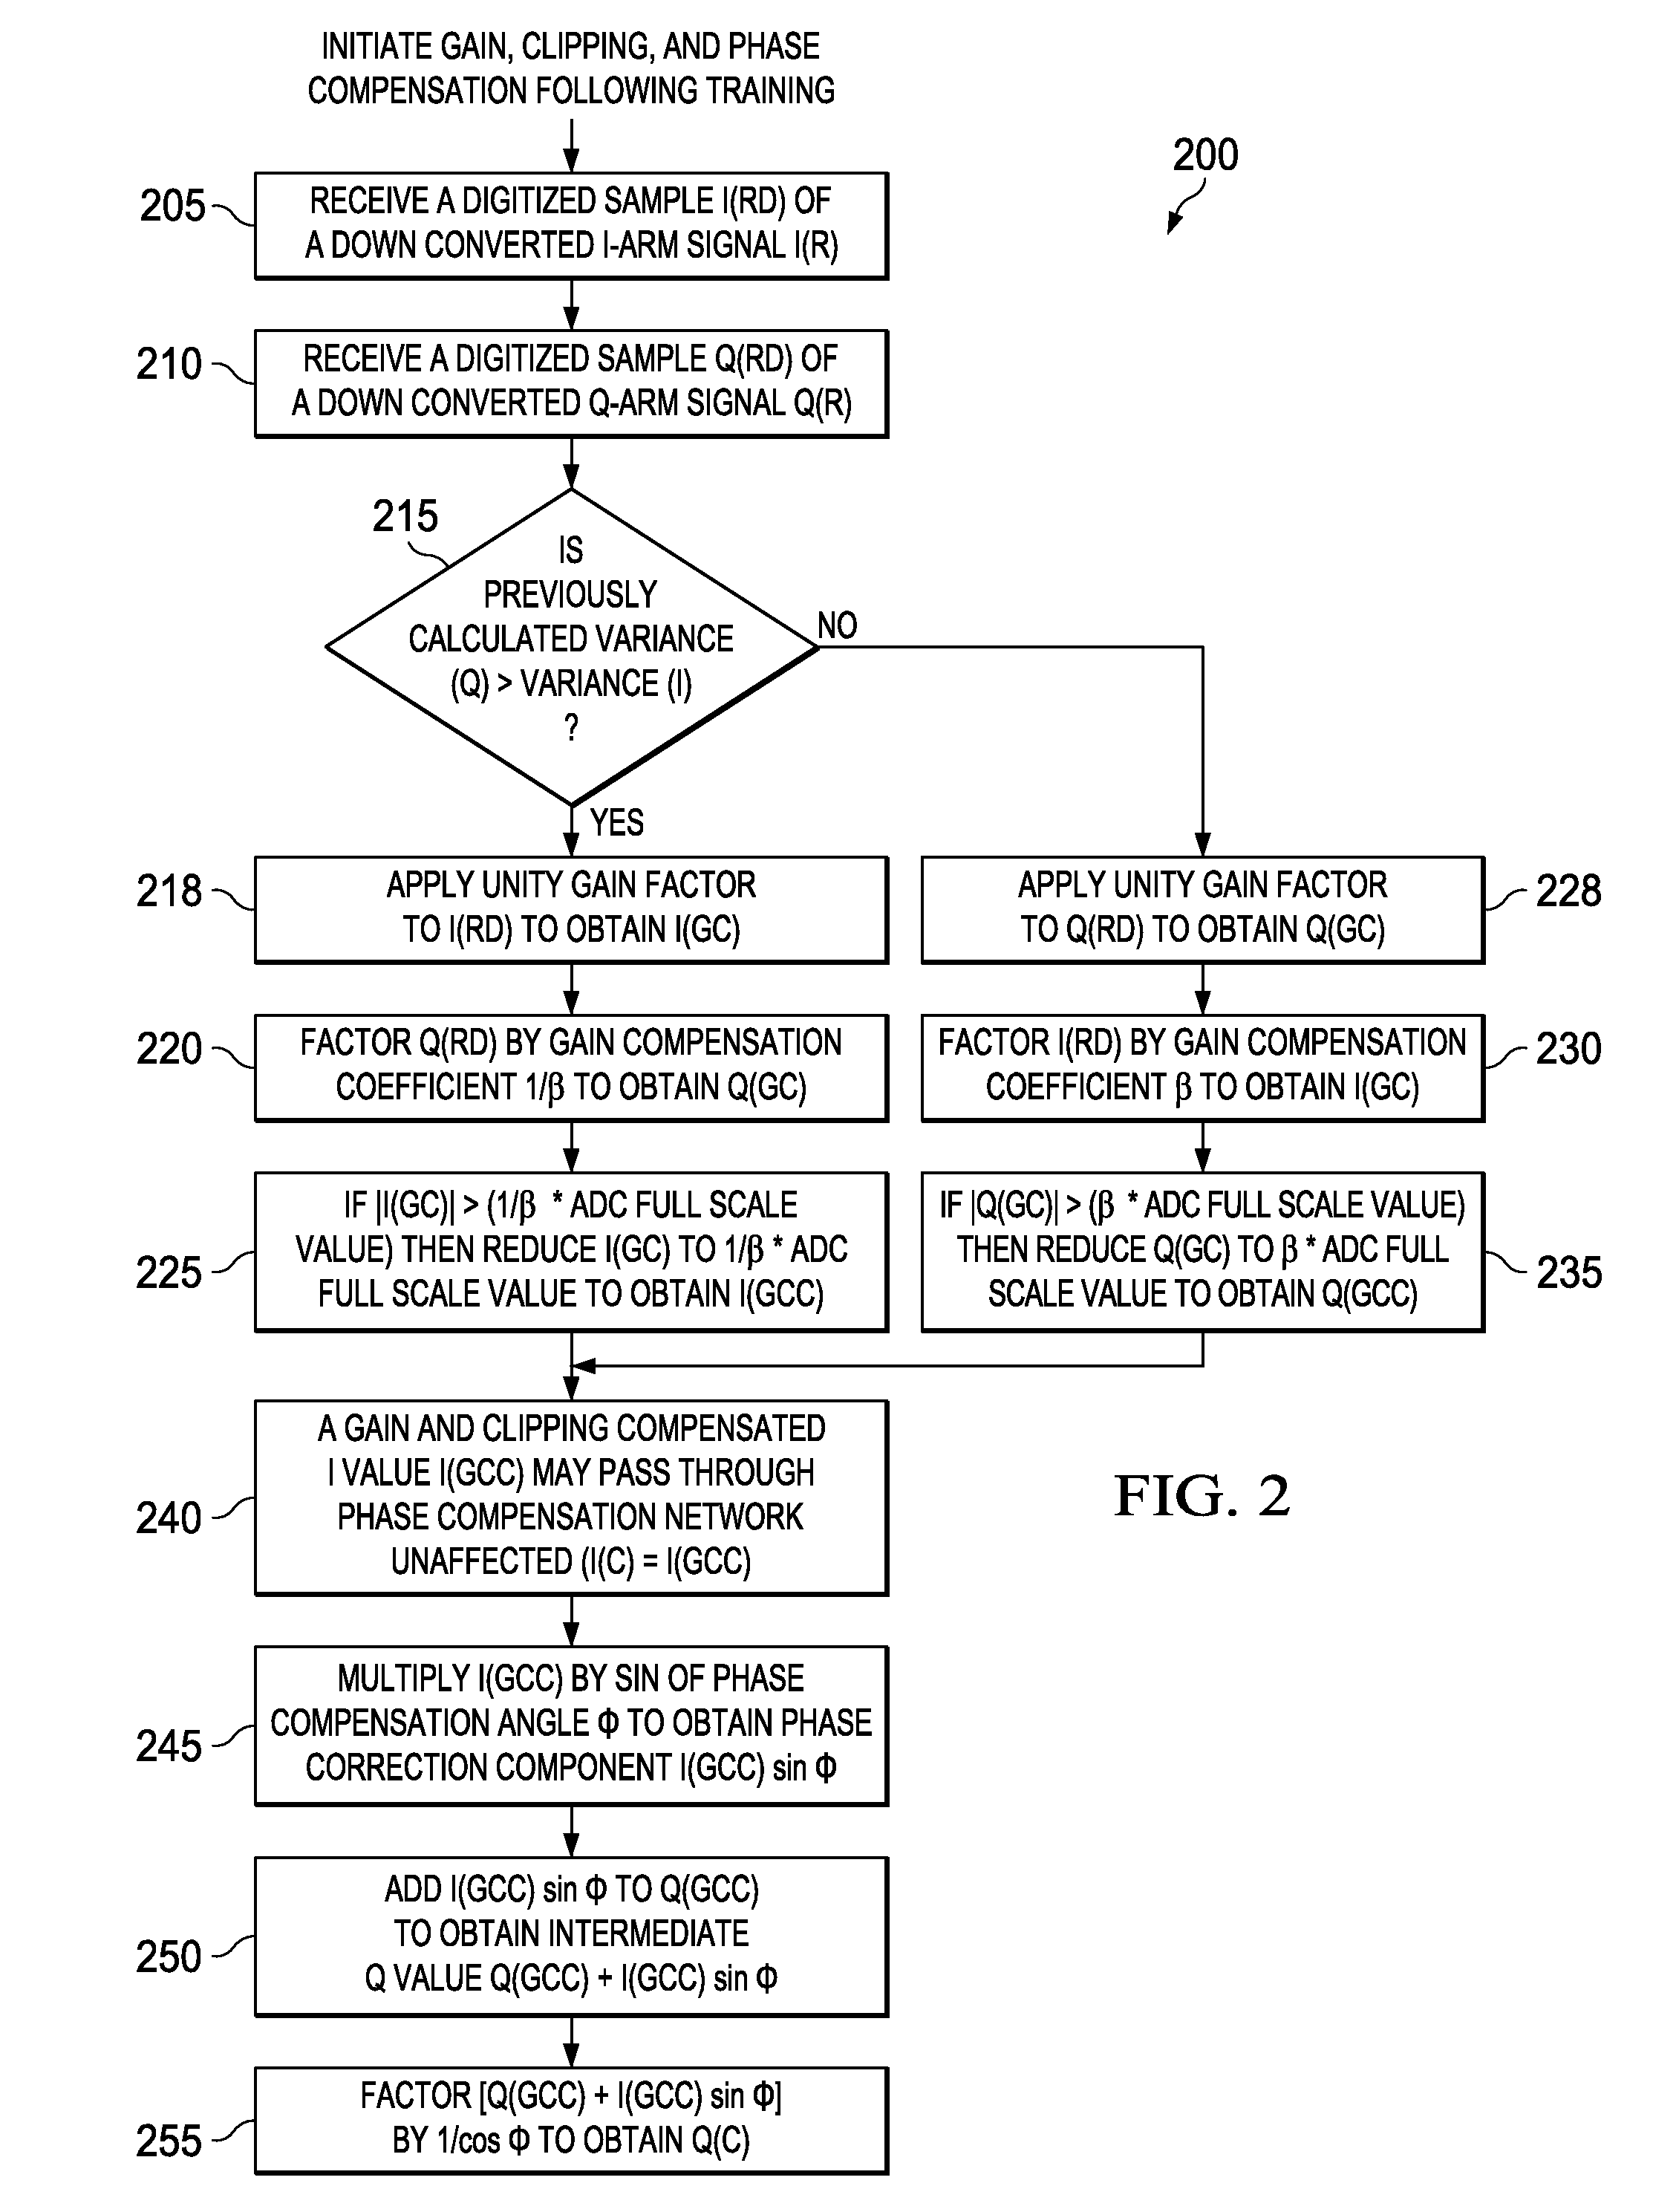 Blind i/q mismatch compensation with receiver non-linearity